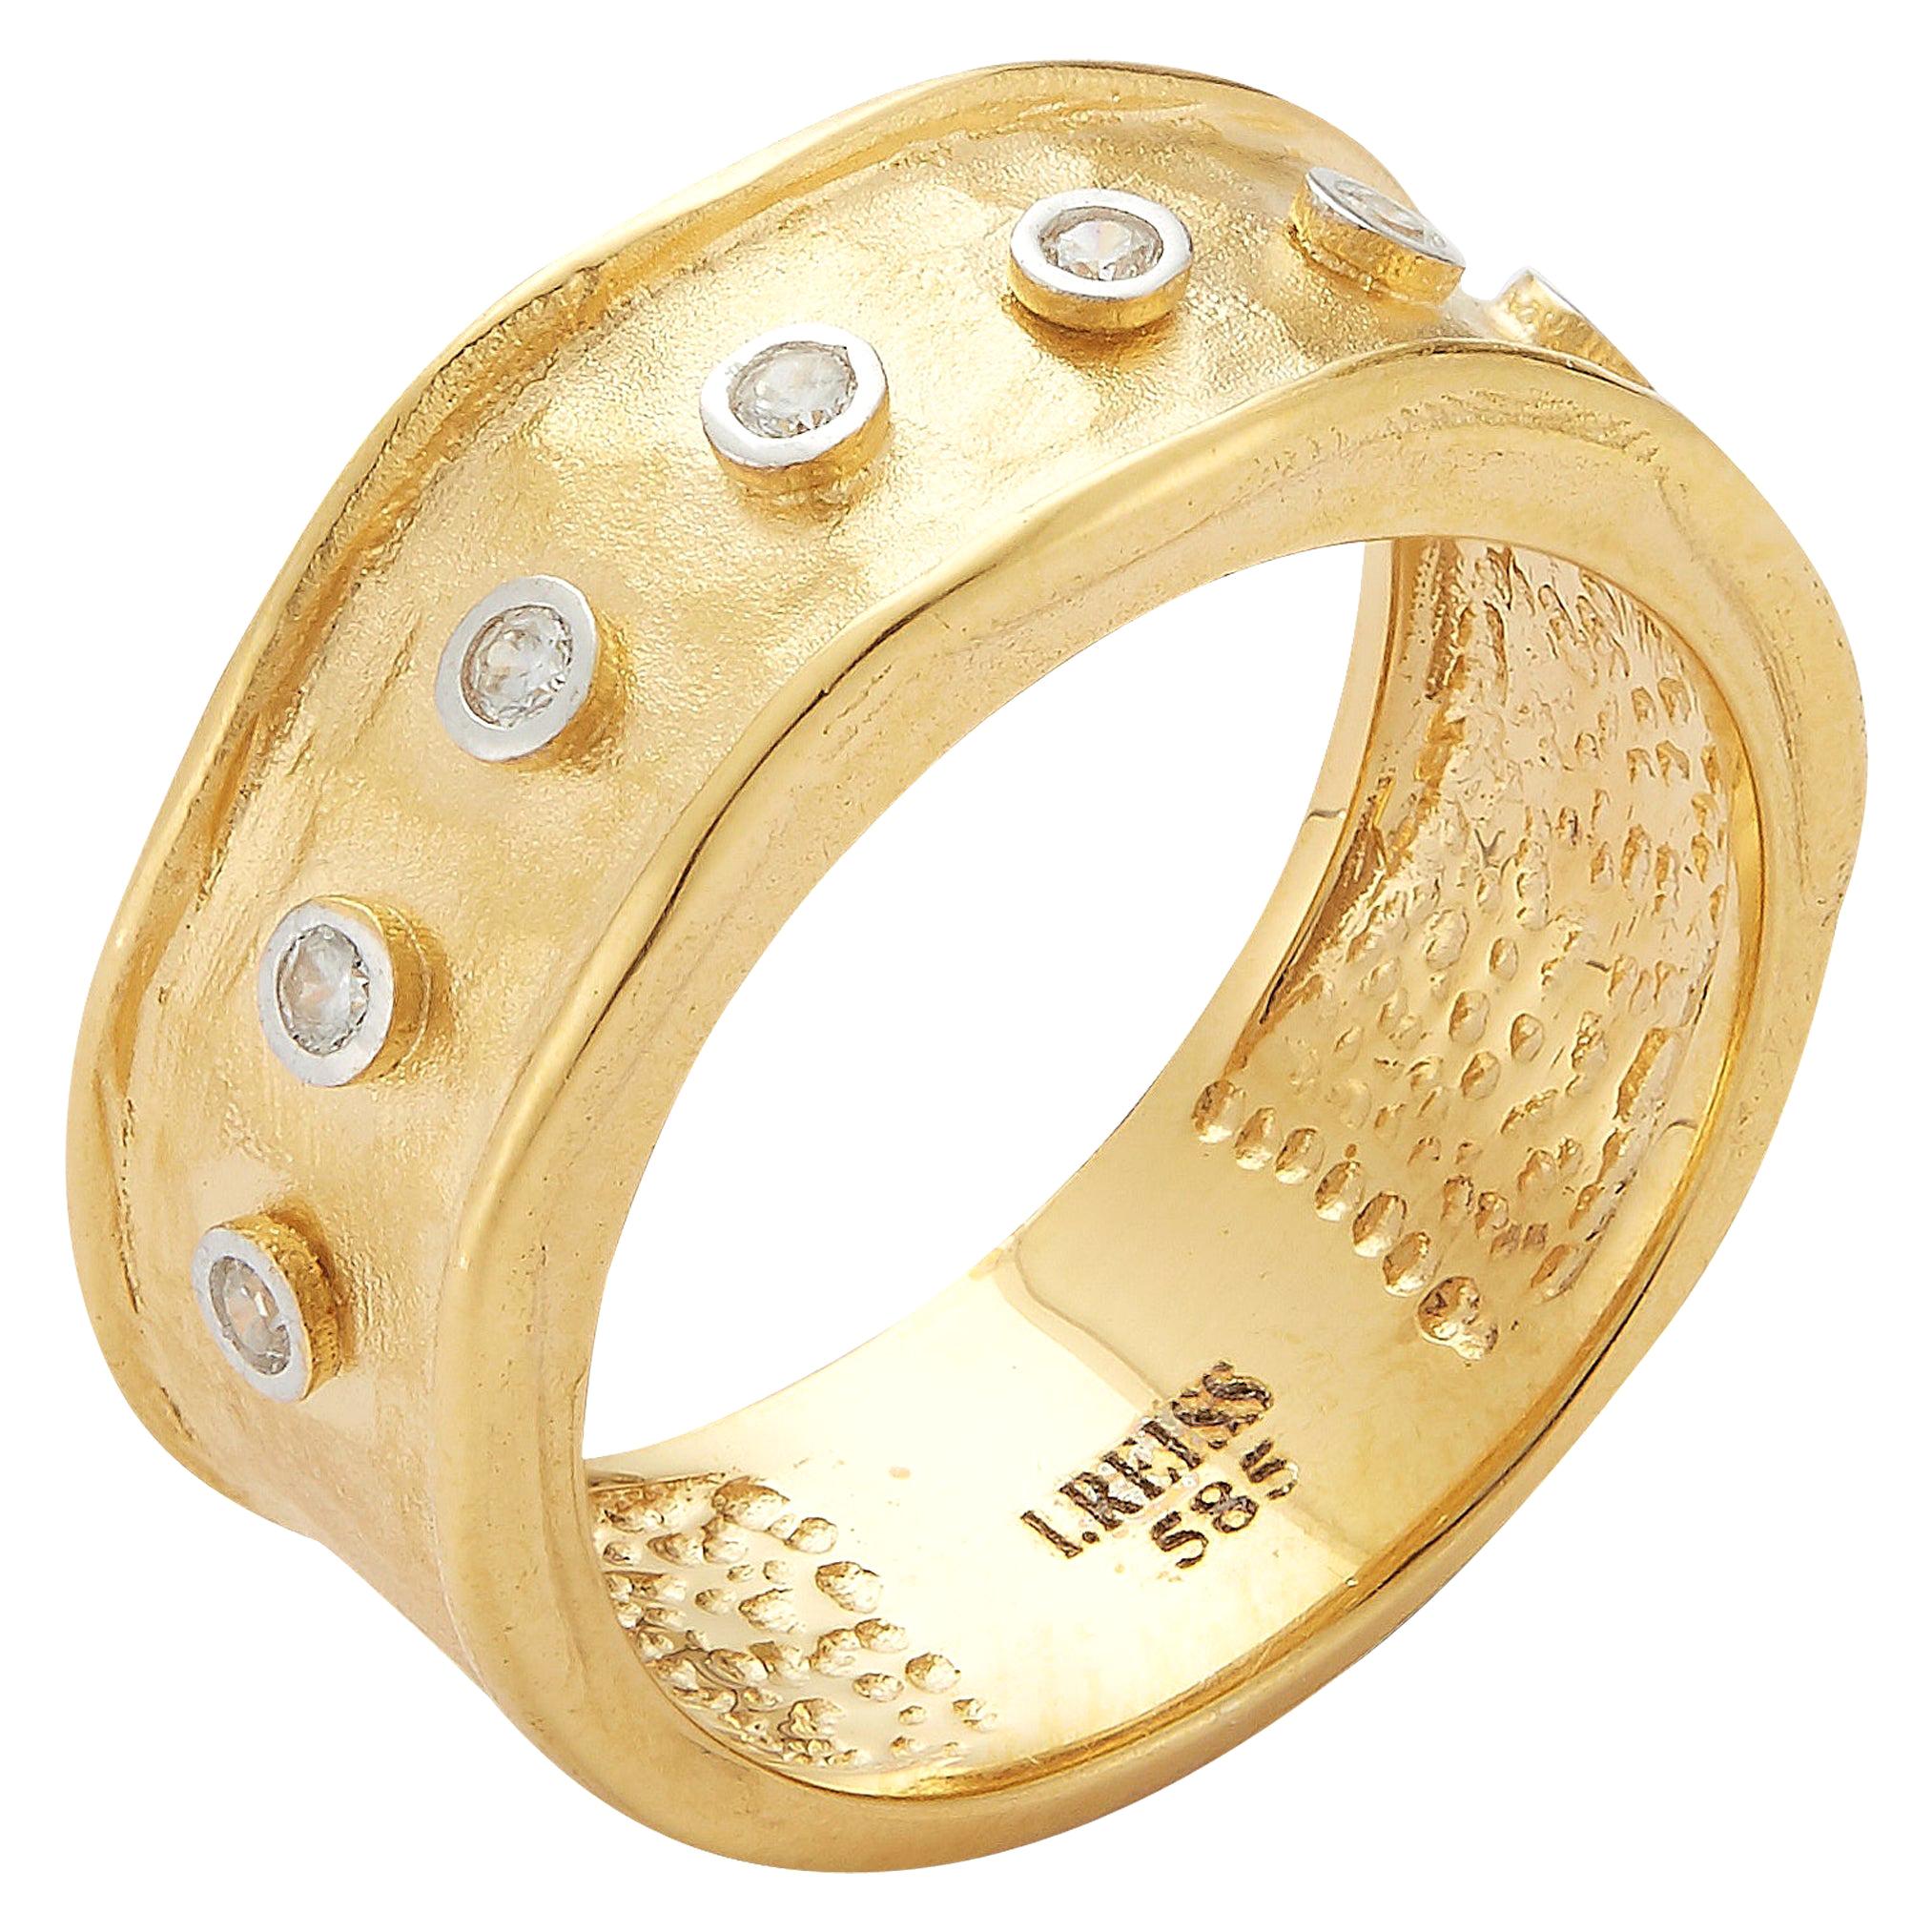 For Sale:  Handcrafted 14 Karat Yellow Gold Hammered Narrow Rings with Bezel Diamonds